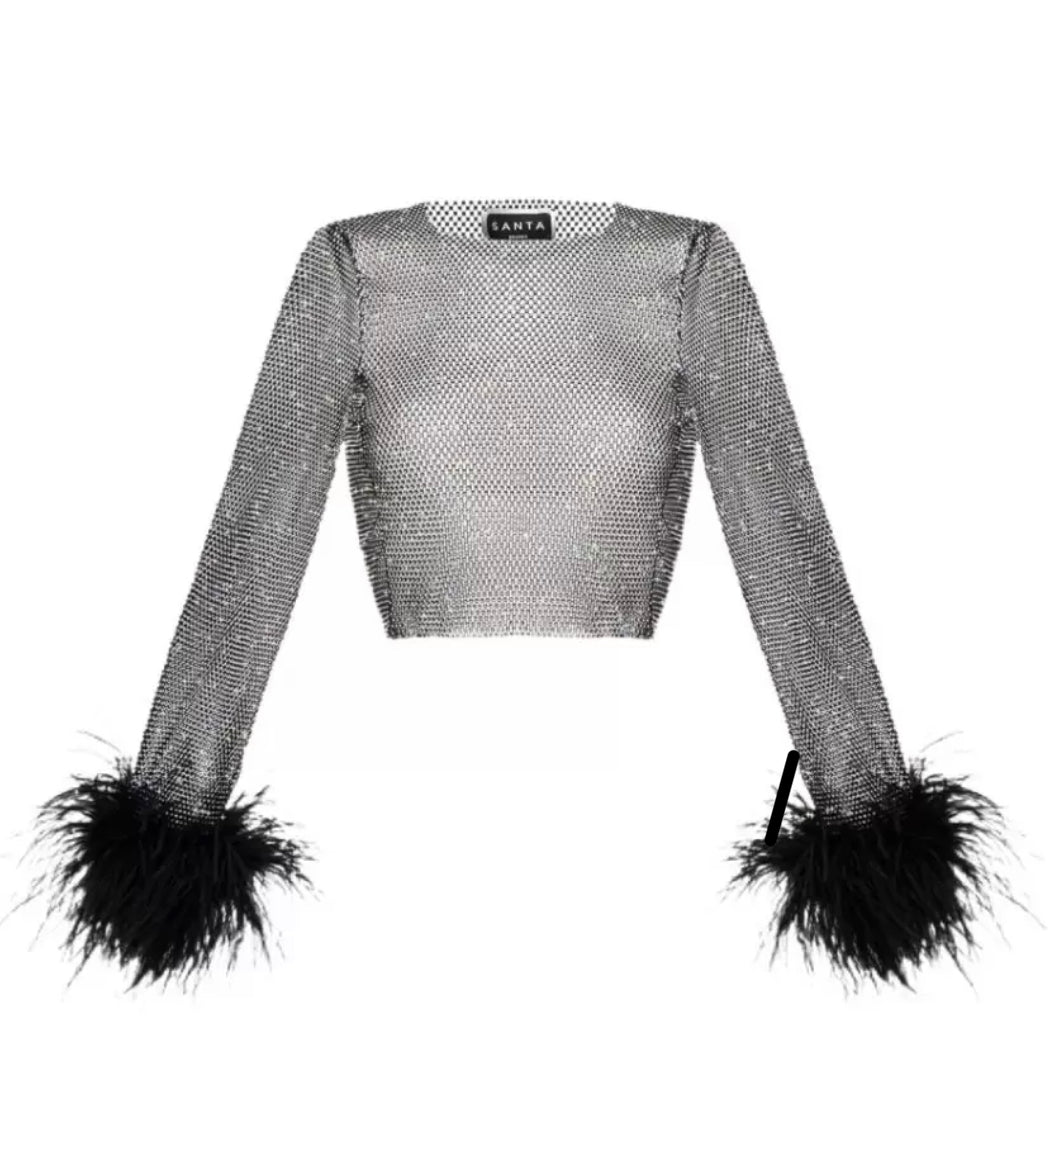 Black Feathers Top